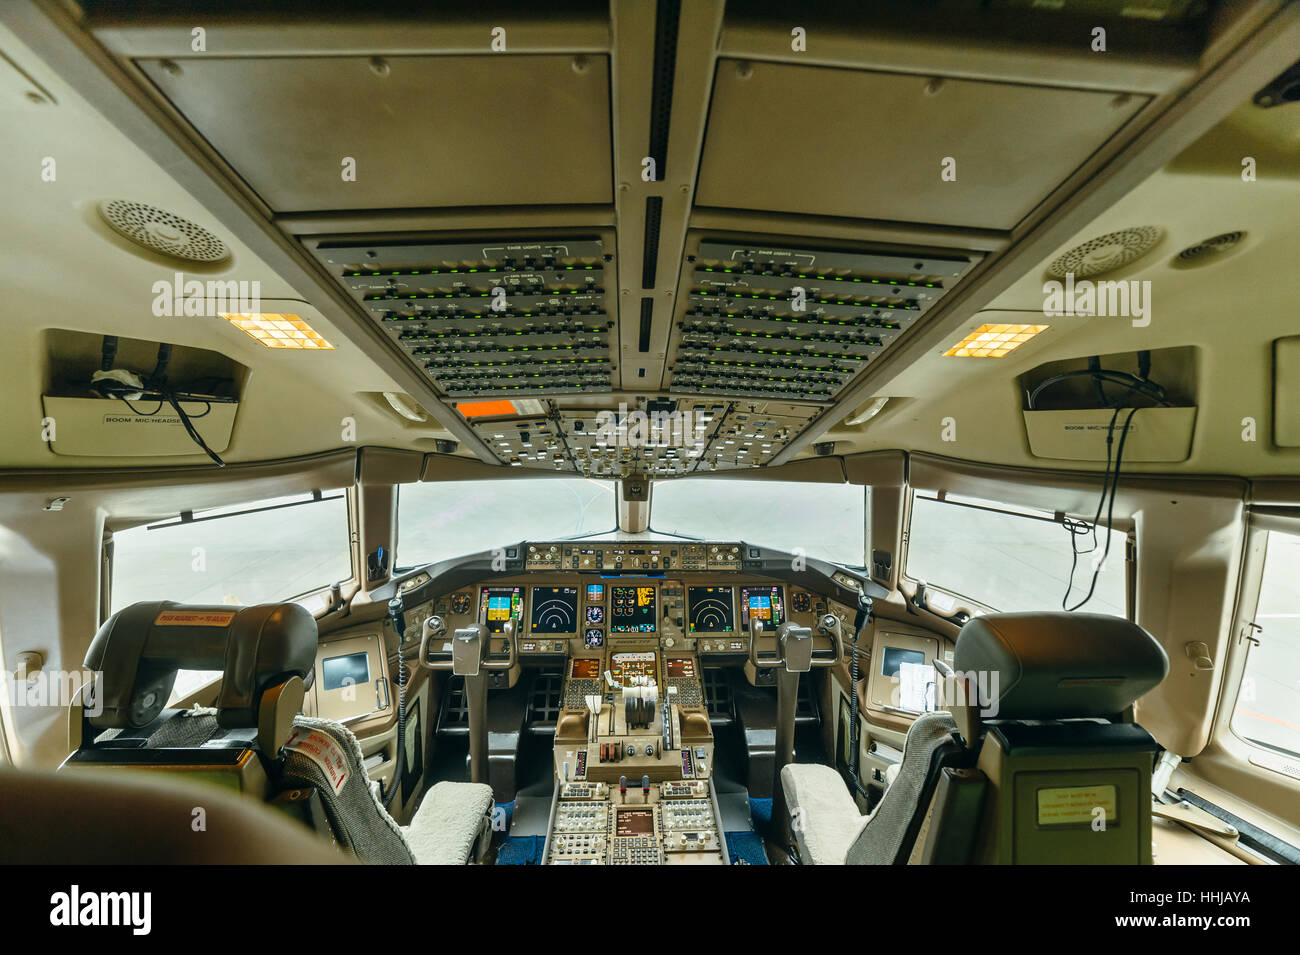 Page 2 - Boeing 767 Cockpit High Resolution Stock Photography and Images -  Alamy